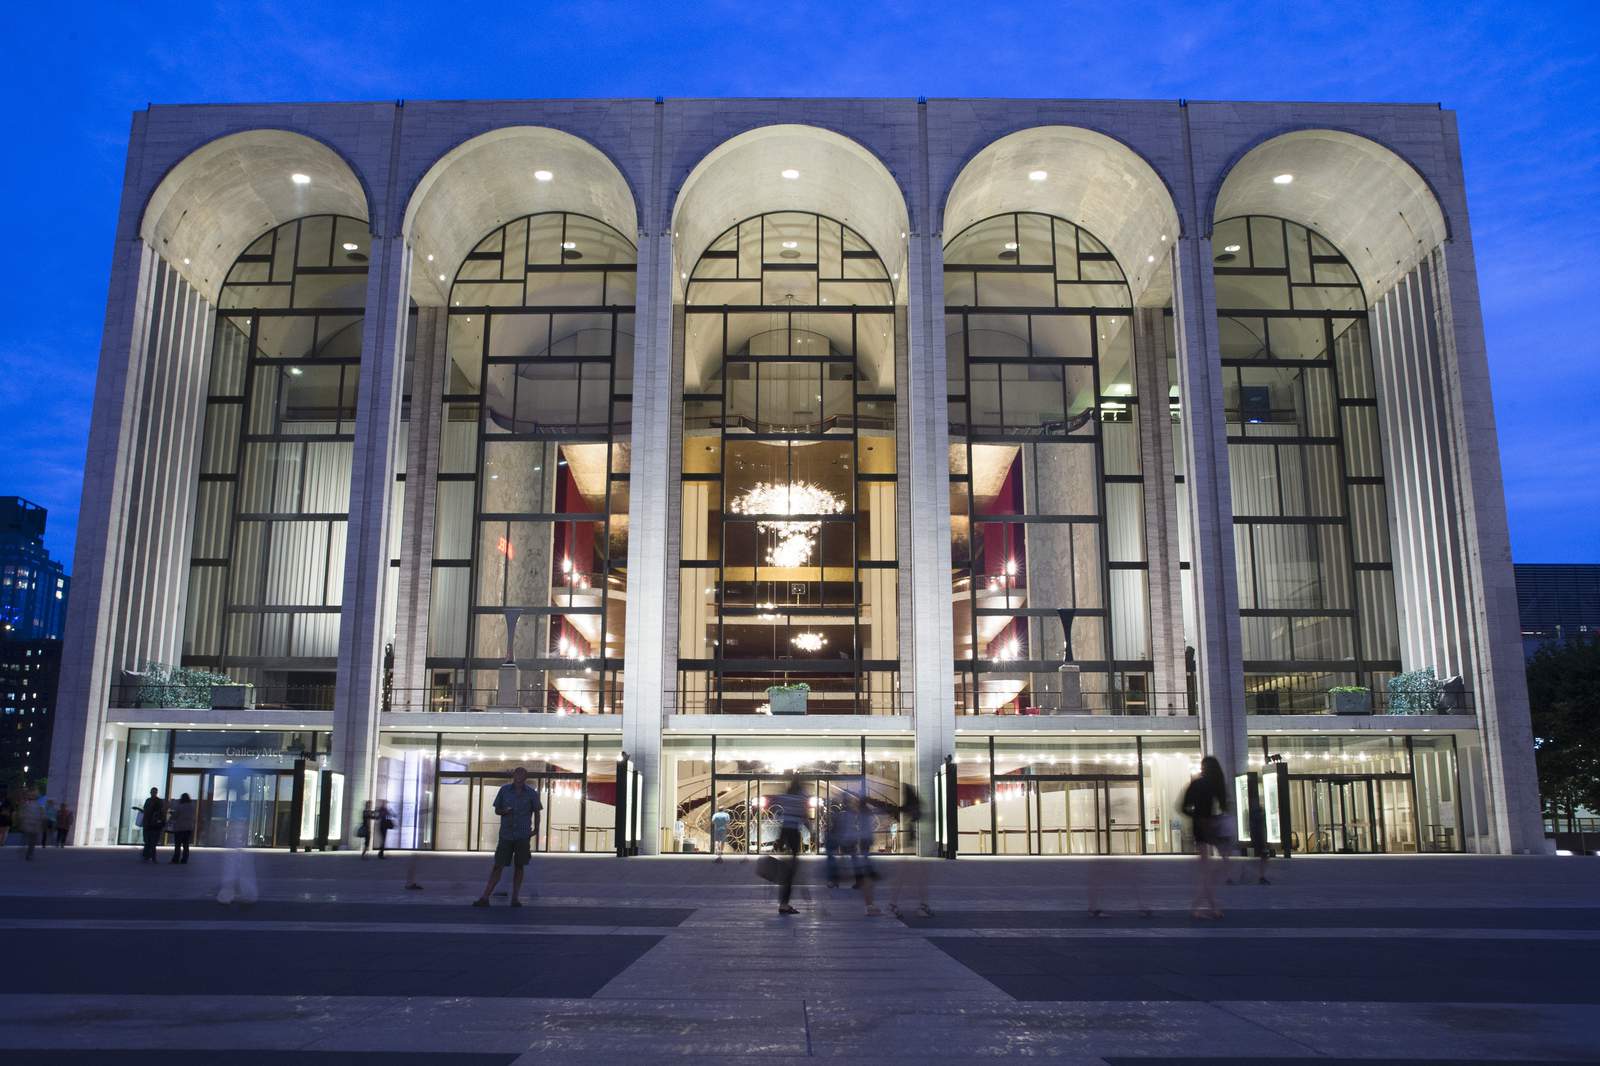 Met Opera cuts season by 3 1/2 months, to shorten some shows